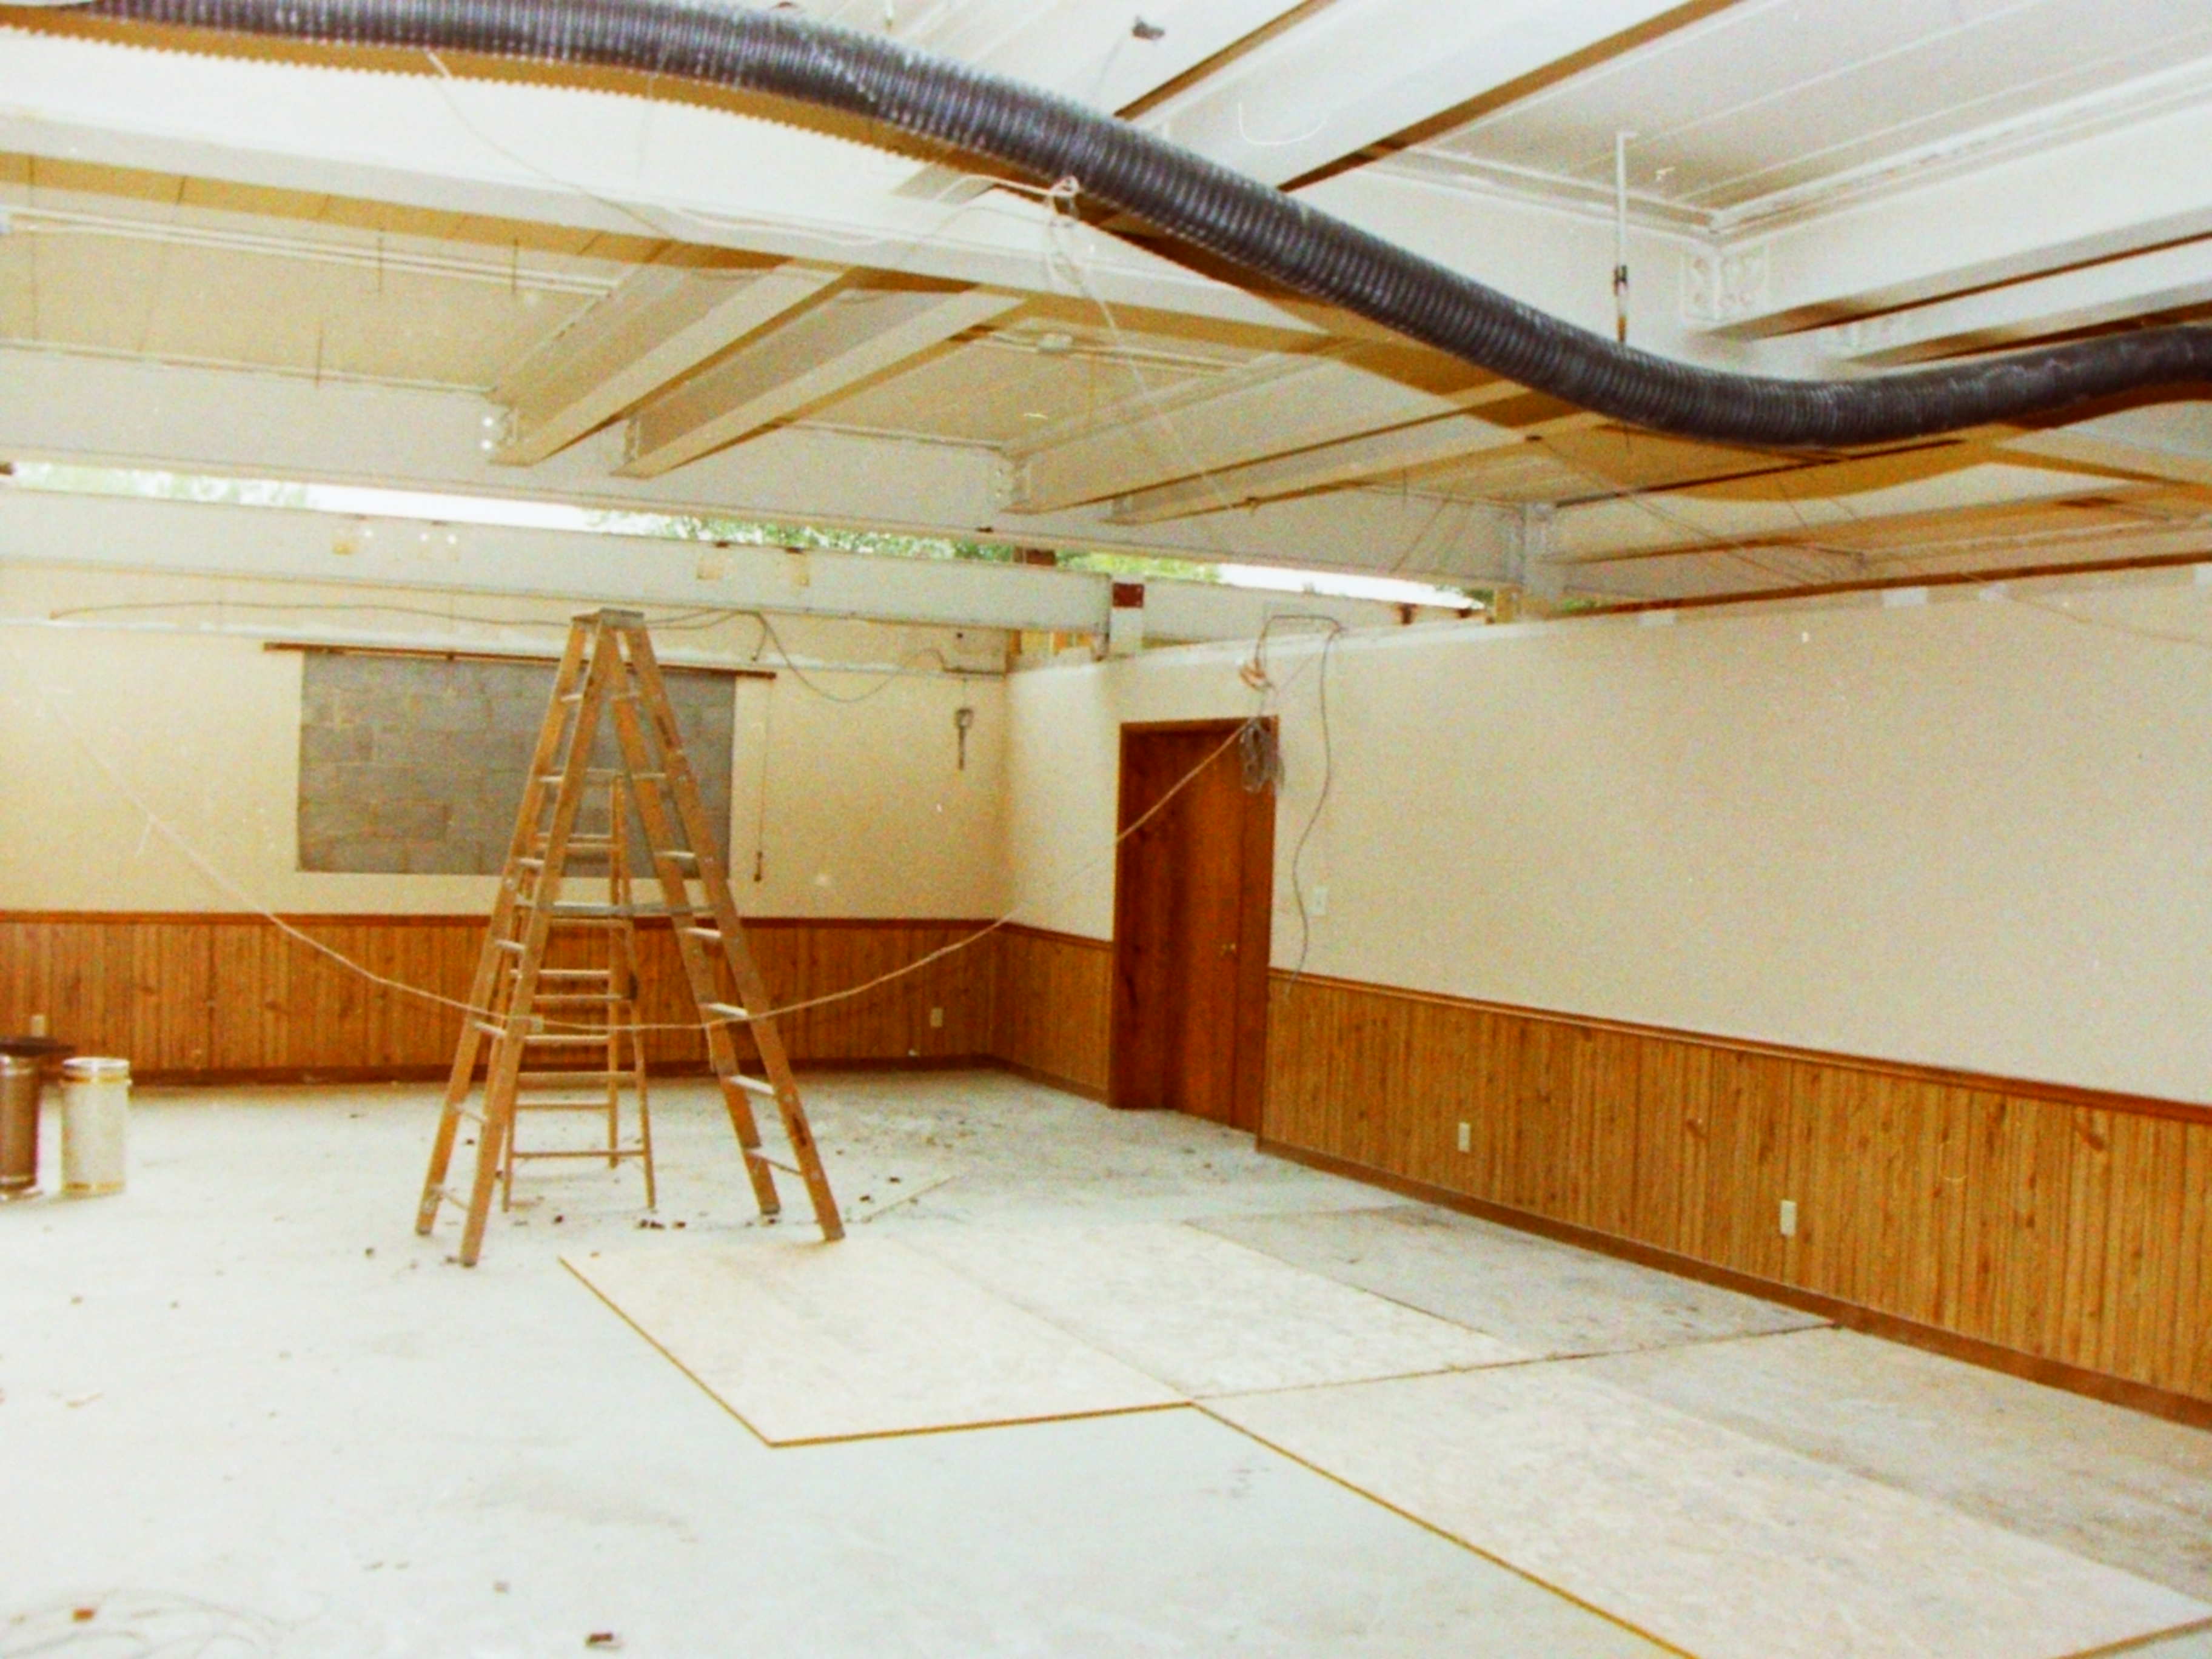 09-06-91  Other - Renovations 3